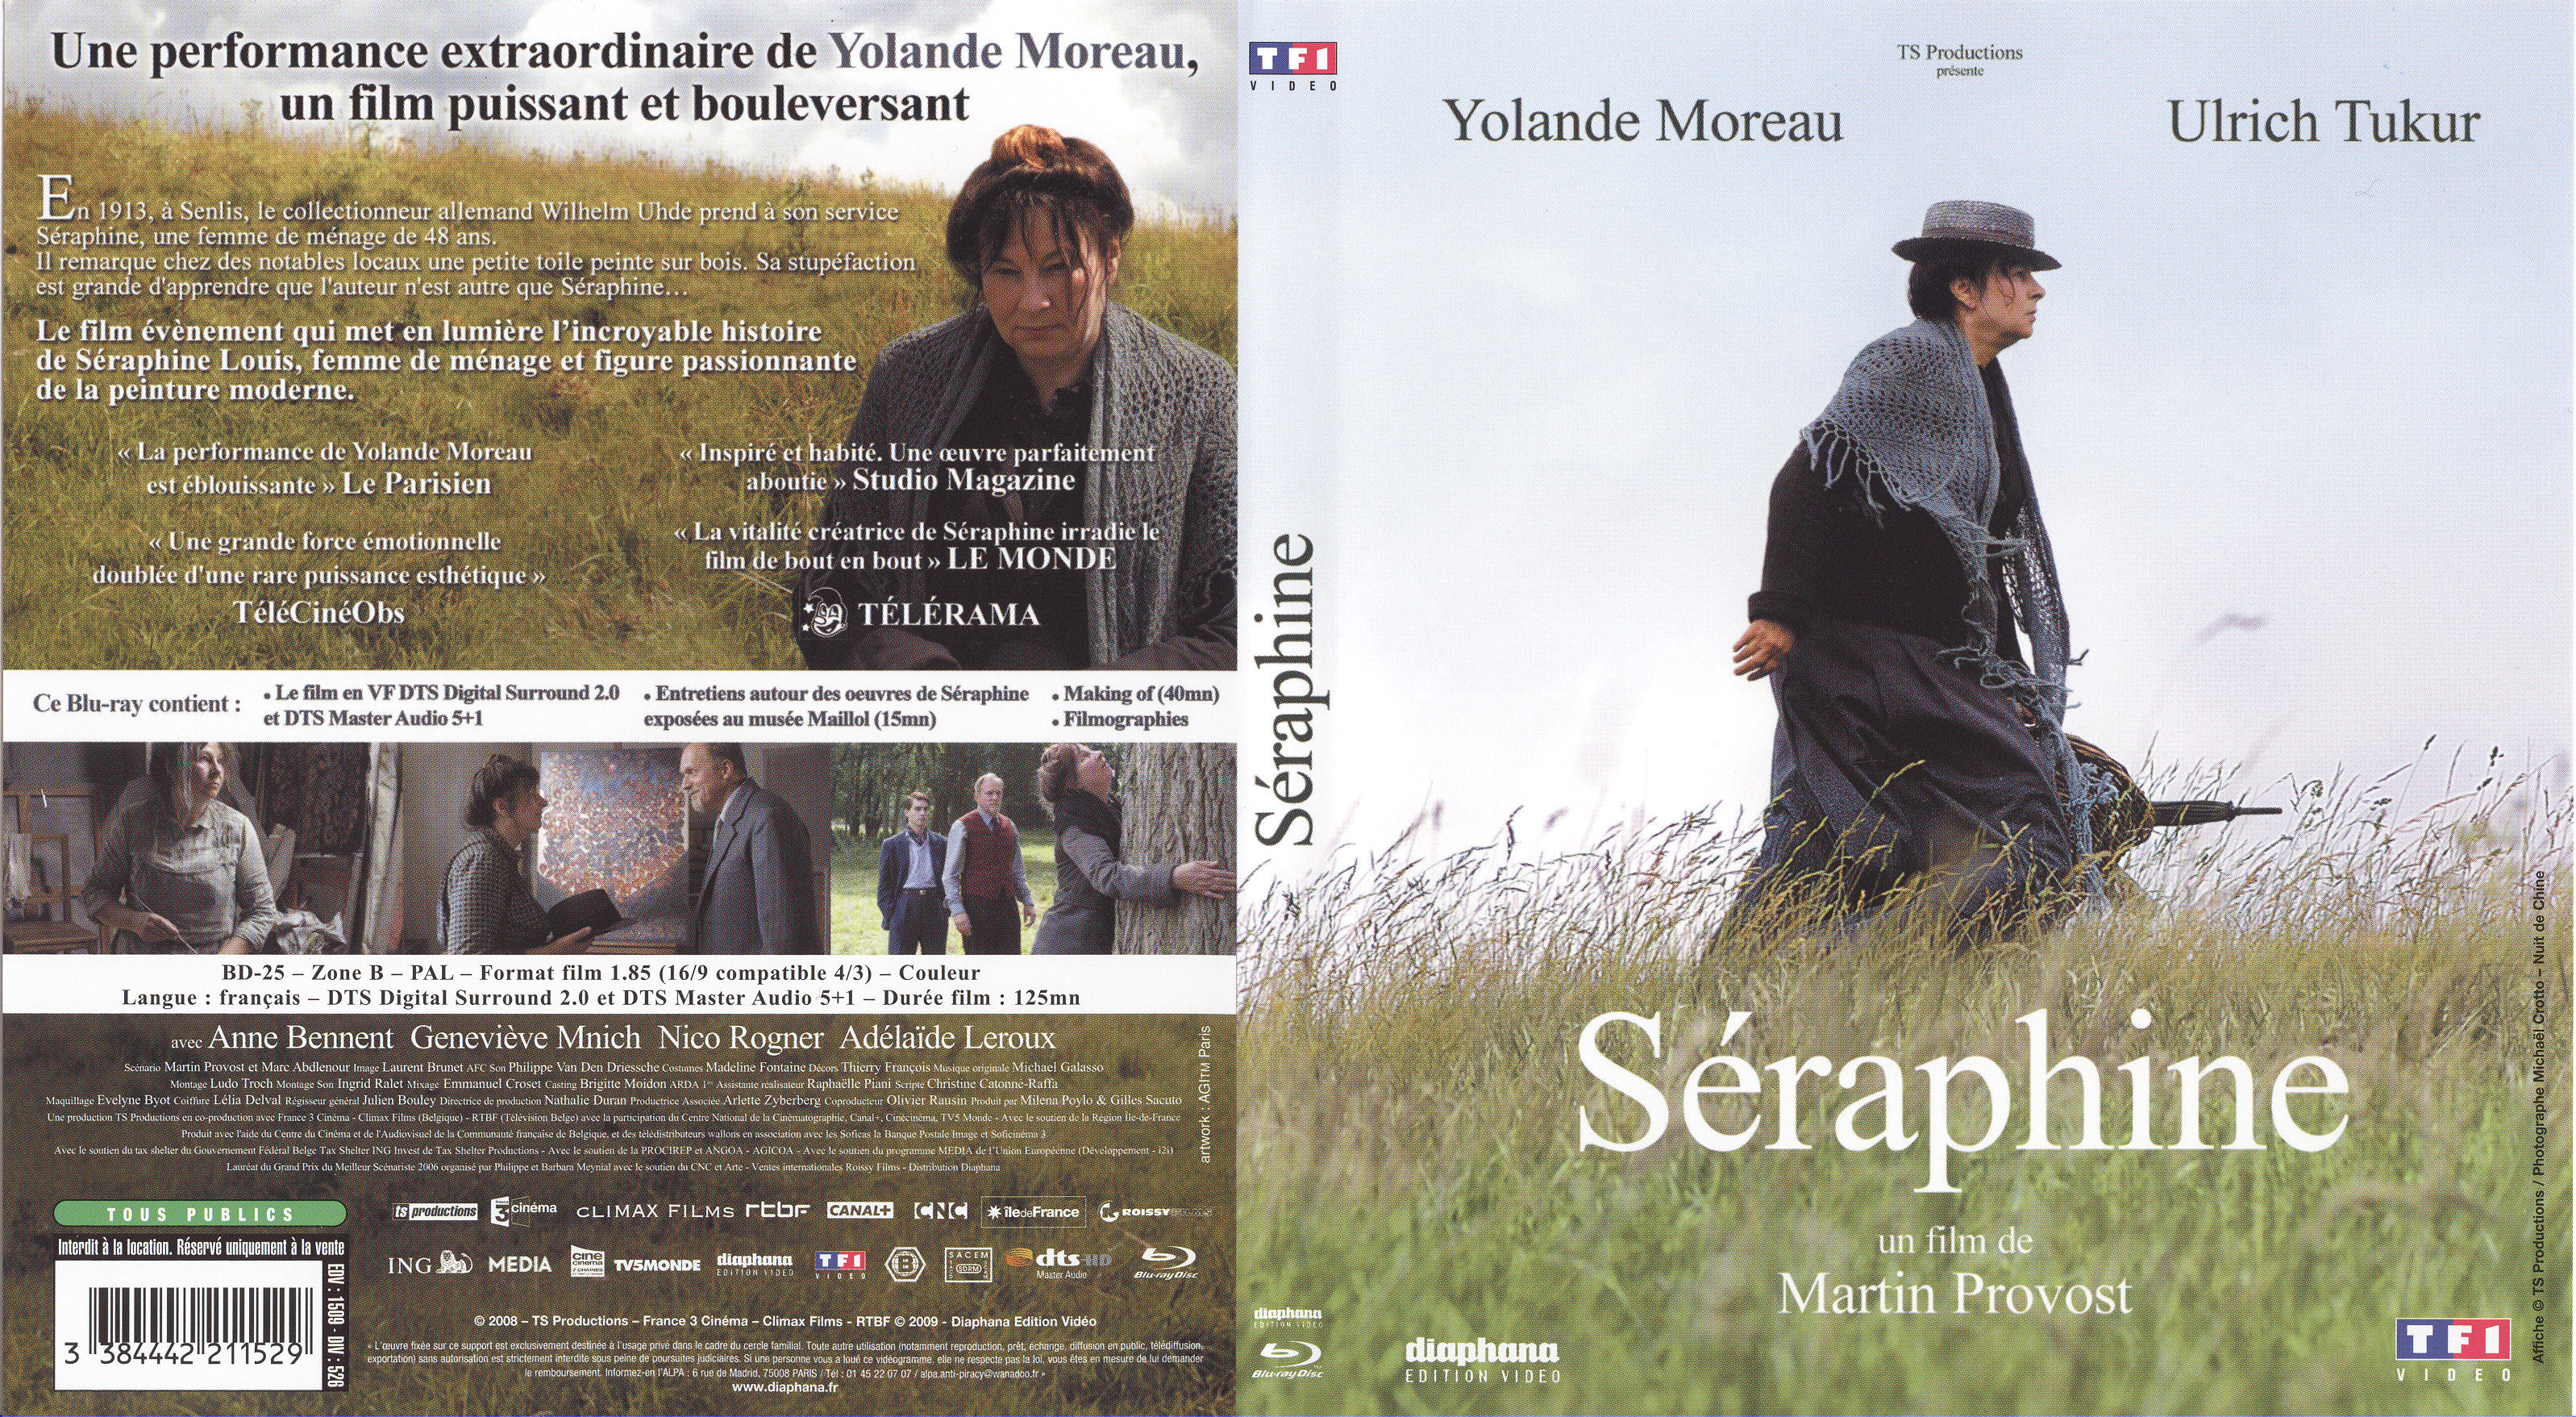 Jaquette DVD Sraphine (BLU-RAY)